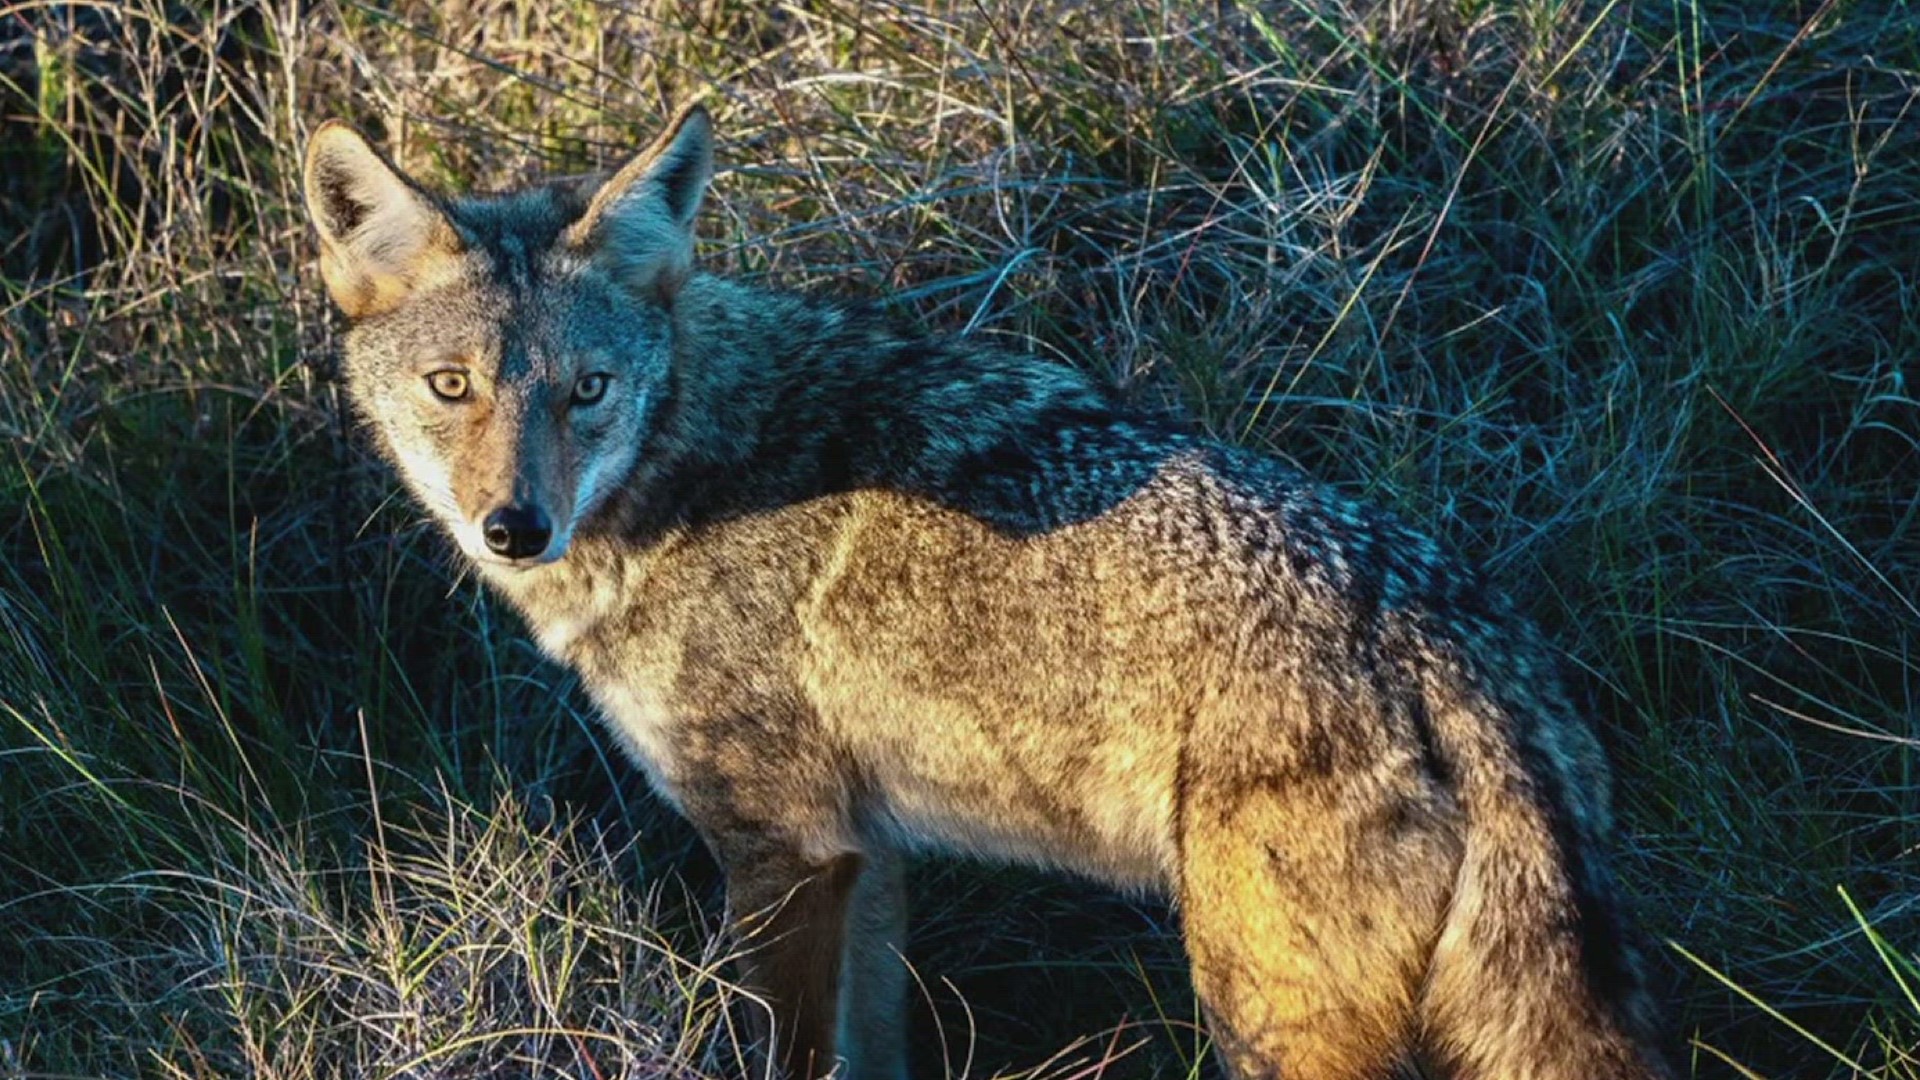 The city's animal control officer B.J. Grimes said that recent development is driving the coyotes closer into city limits.